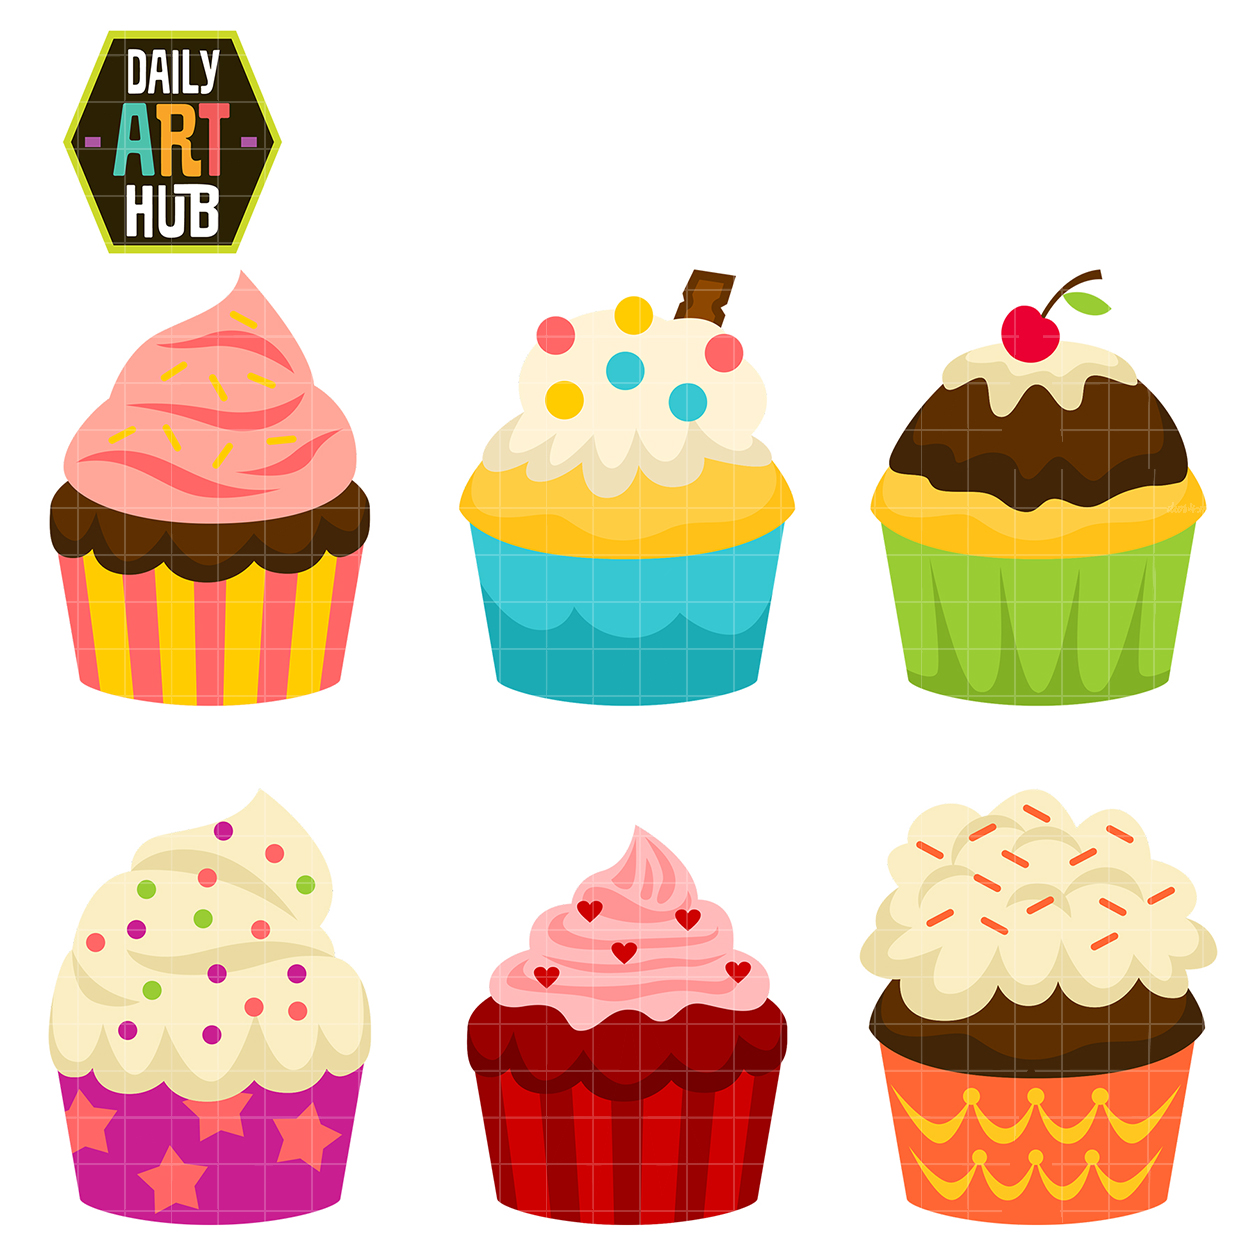 Cupcakes clipart cakesclip. Party cup cakes clip